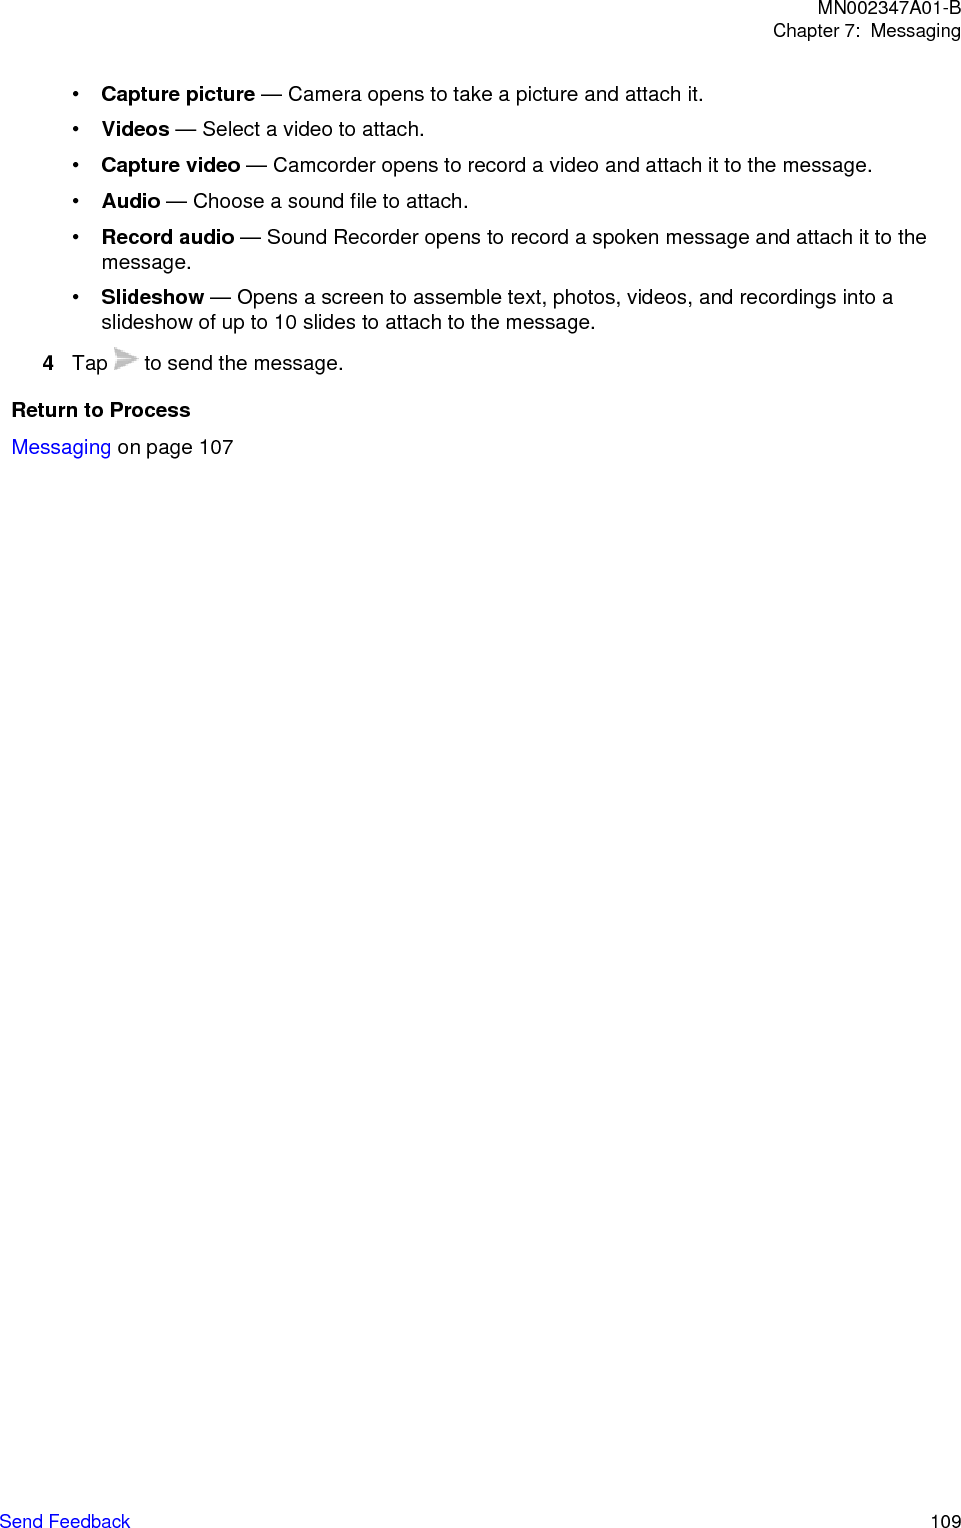 This page intentionally left blank.